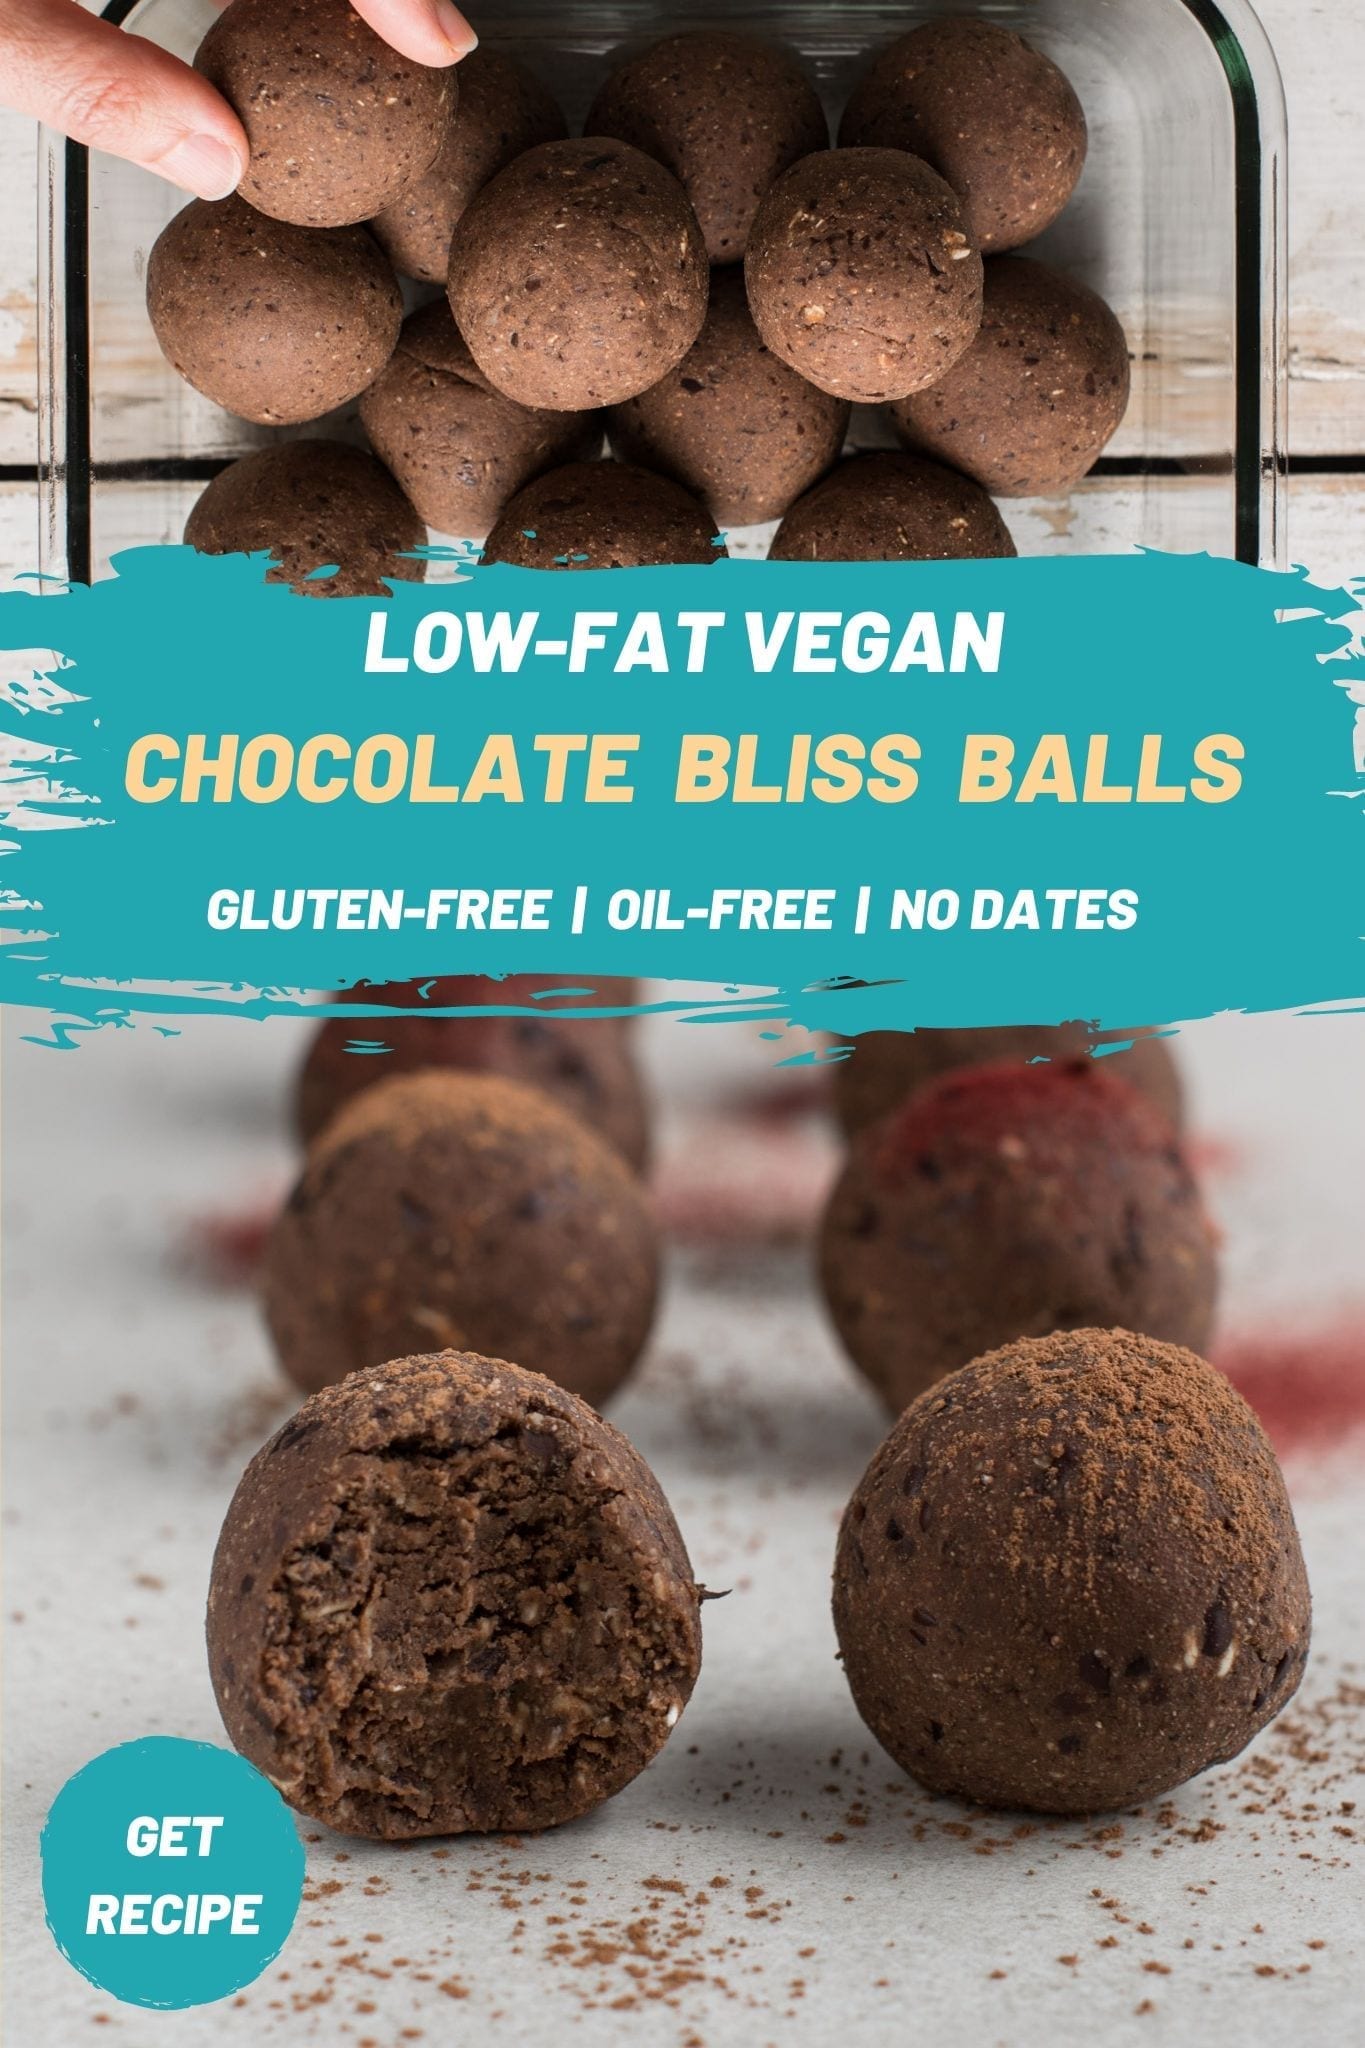 Healthy low-fat no dates chocolate bliss balls that make a great plant-based energy boosting sweet treat. Those energy balls are refined sugar free, oil-free and gluten-free. 